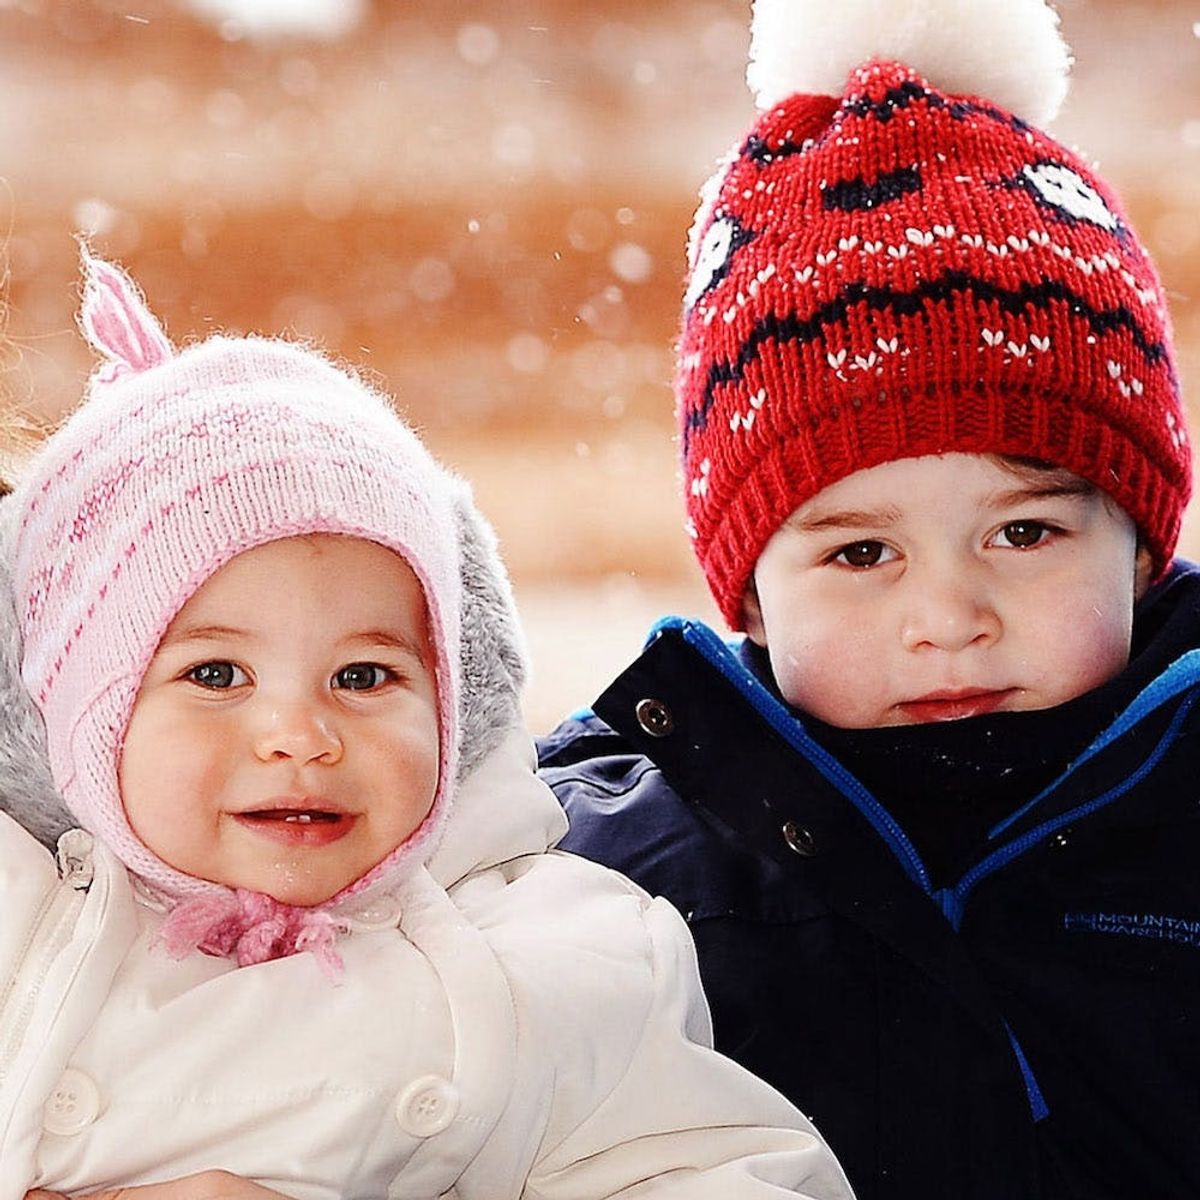 Prince William + Kate Middleton’s Family Snowball Fight Is All of Us During Winter Vacay